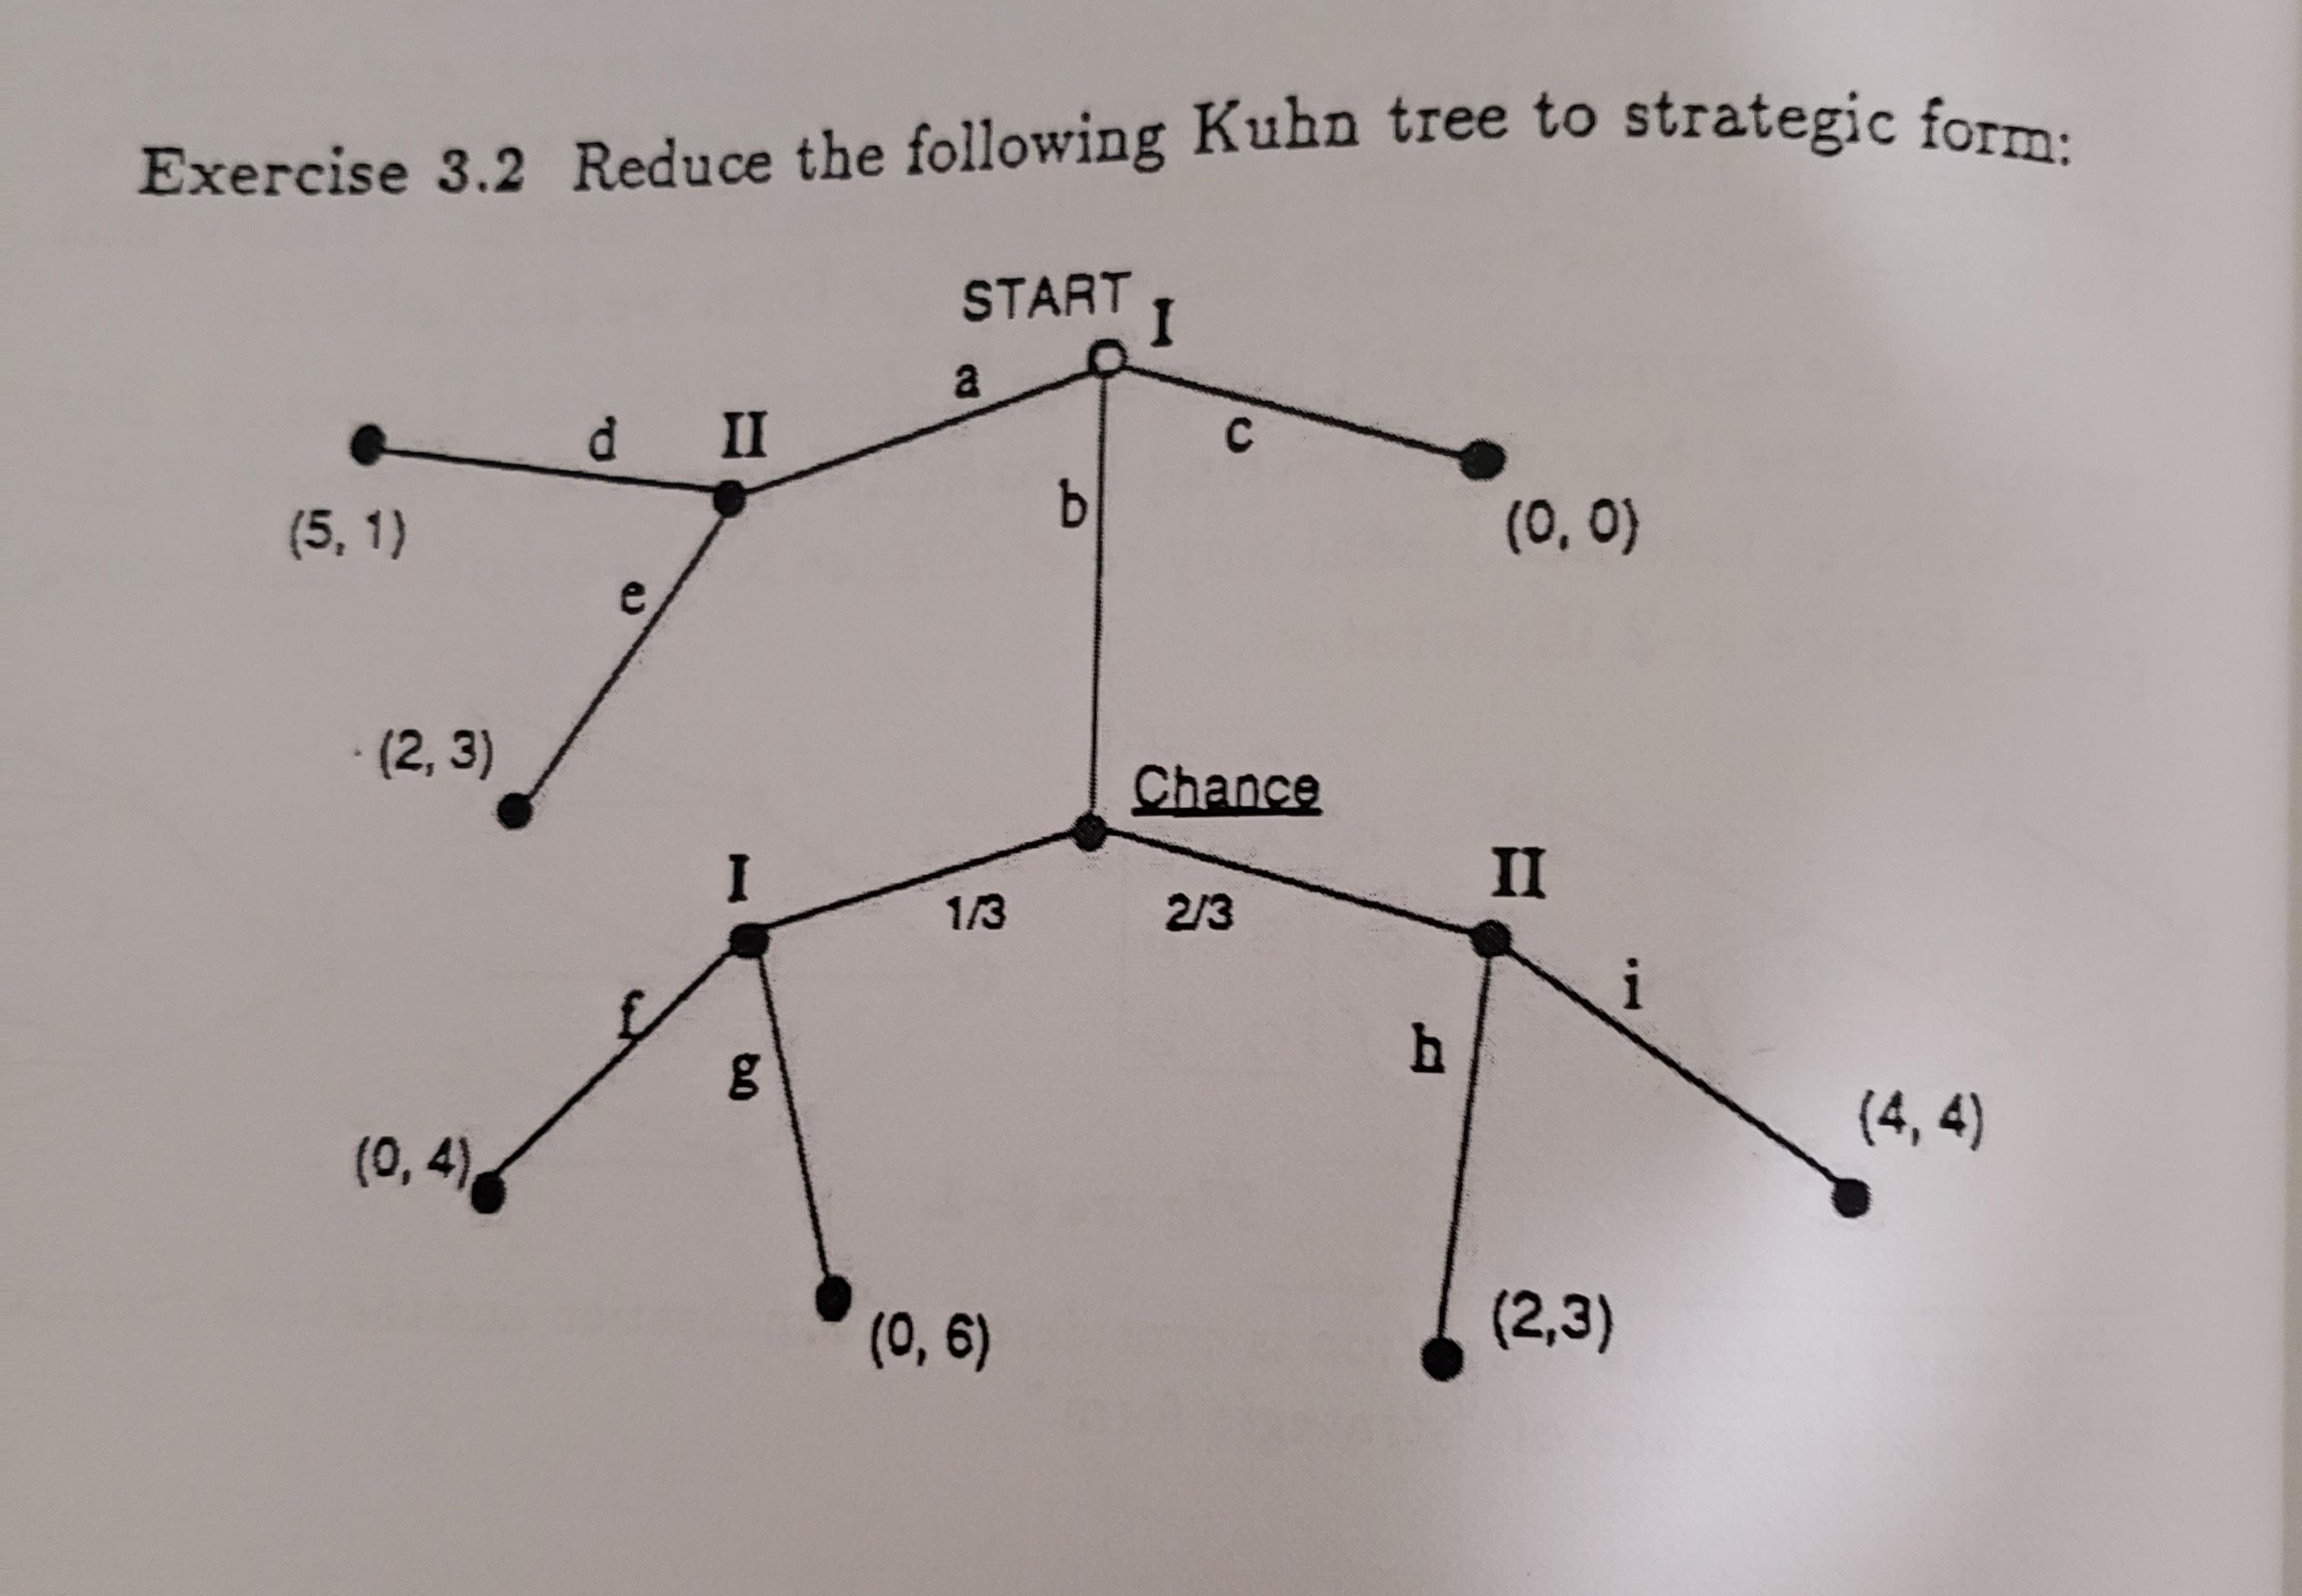 Exercise 3.2 Reduce the following Kuhn tree to strategic form: START I (5,1) - (2,3) (0,4). d II I g a 1/3